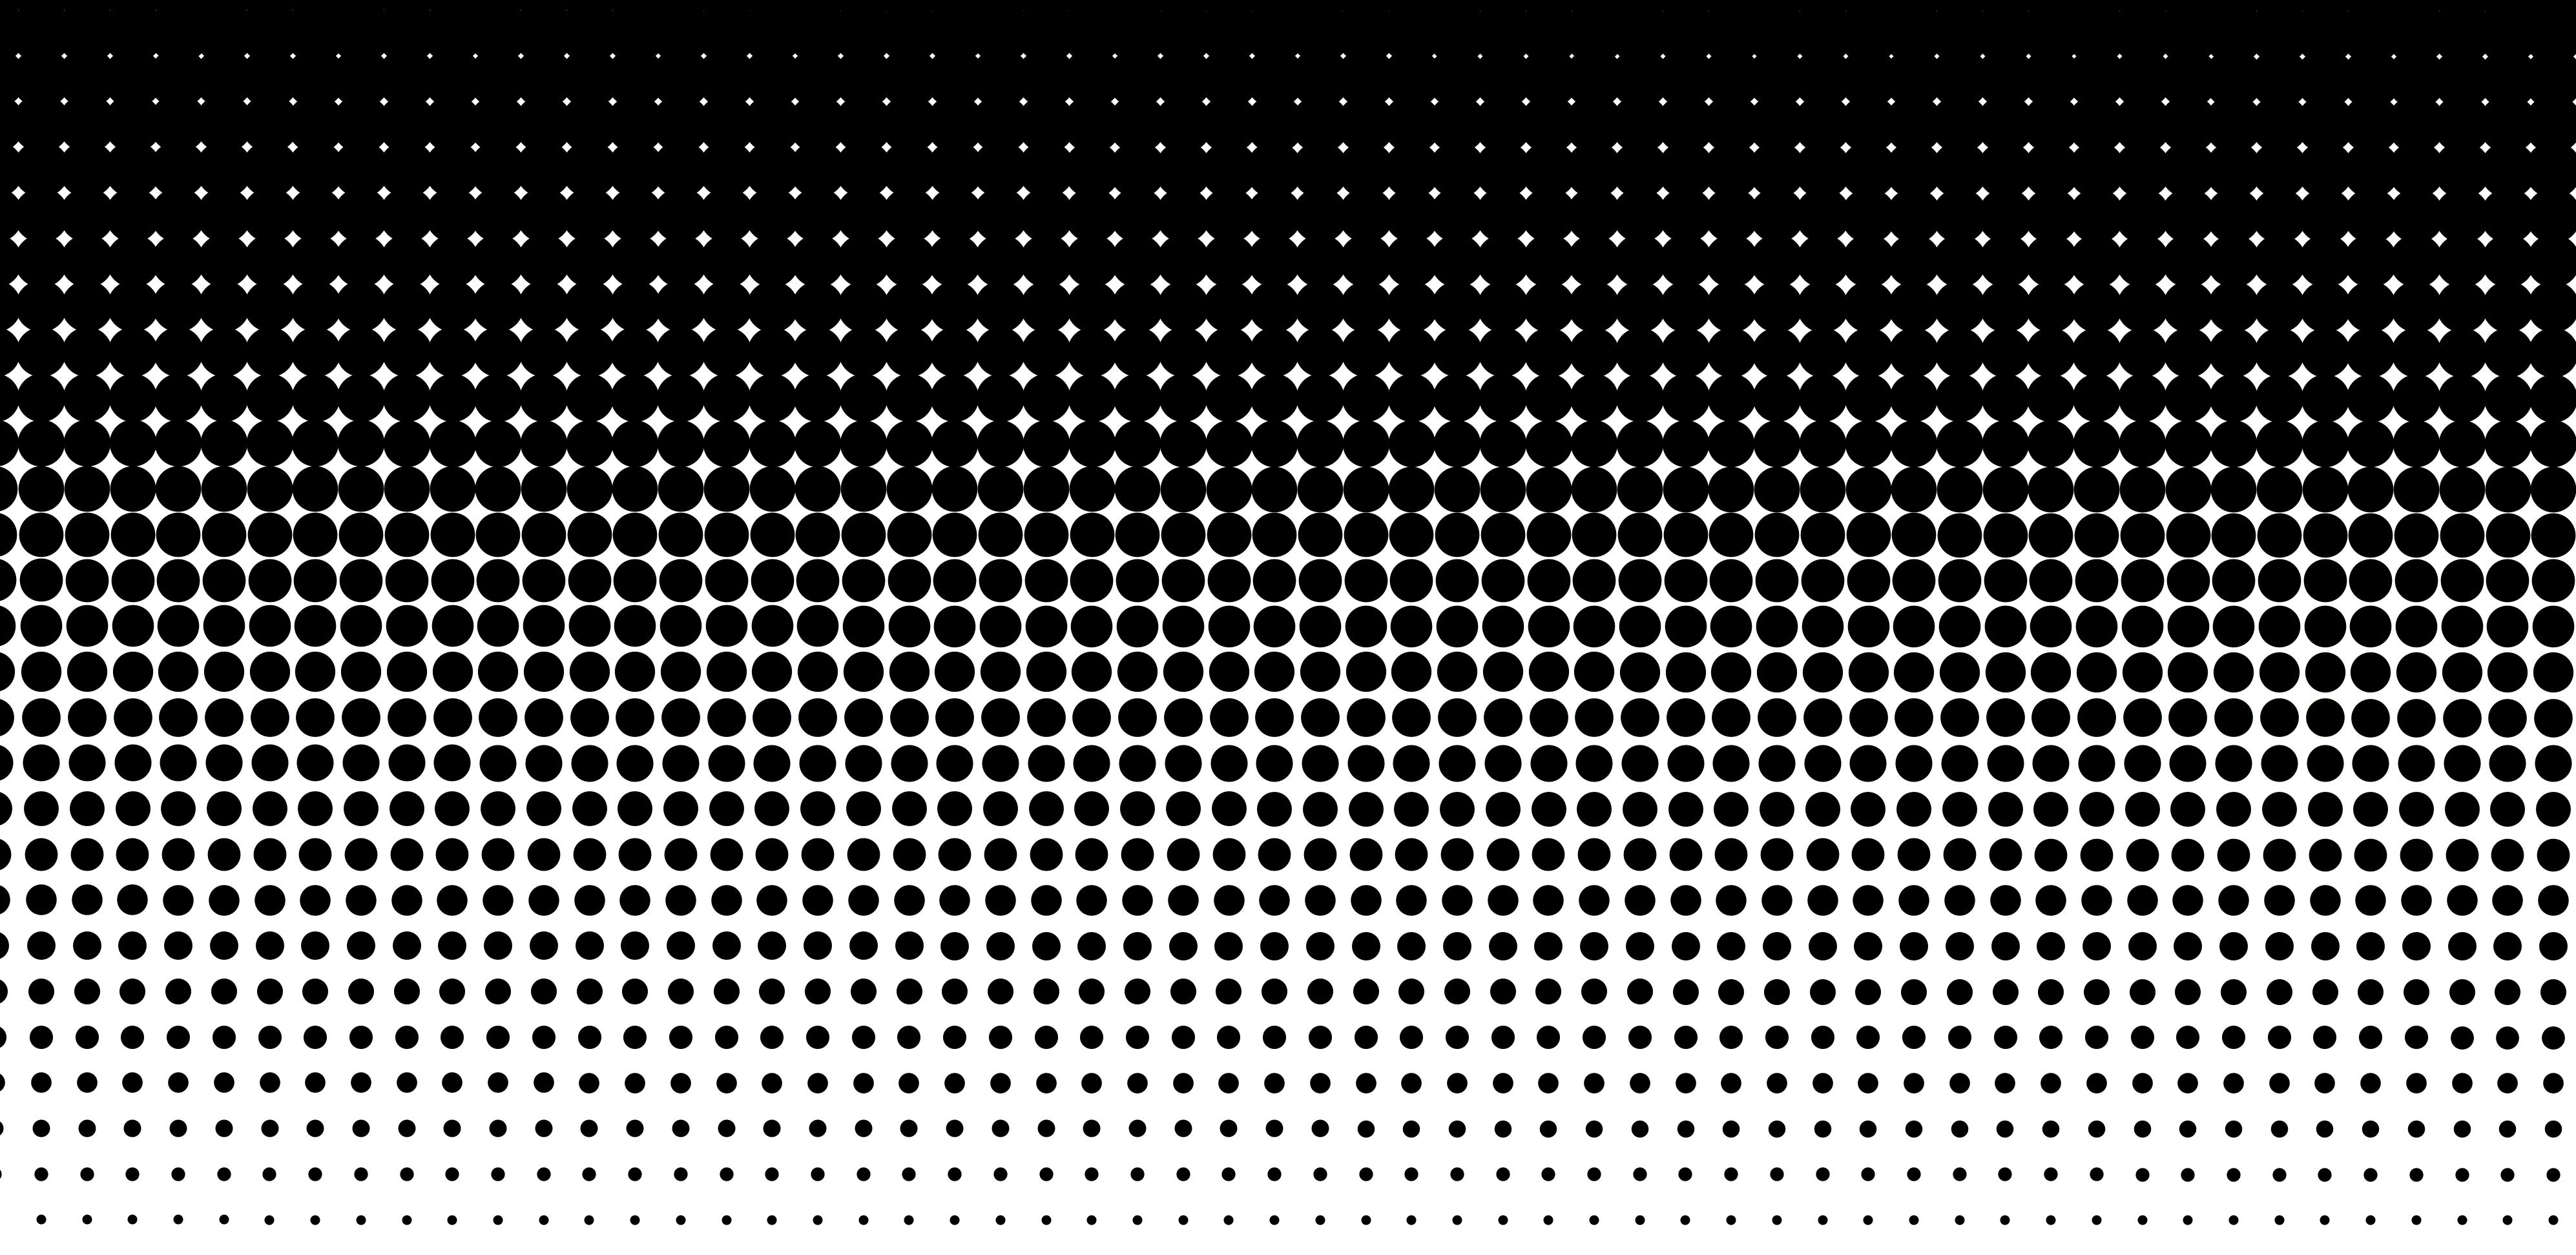 Black And White Halftone Background Clip Art